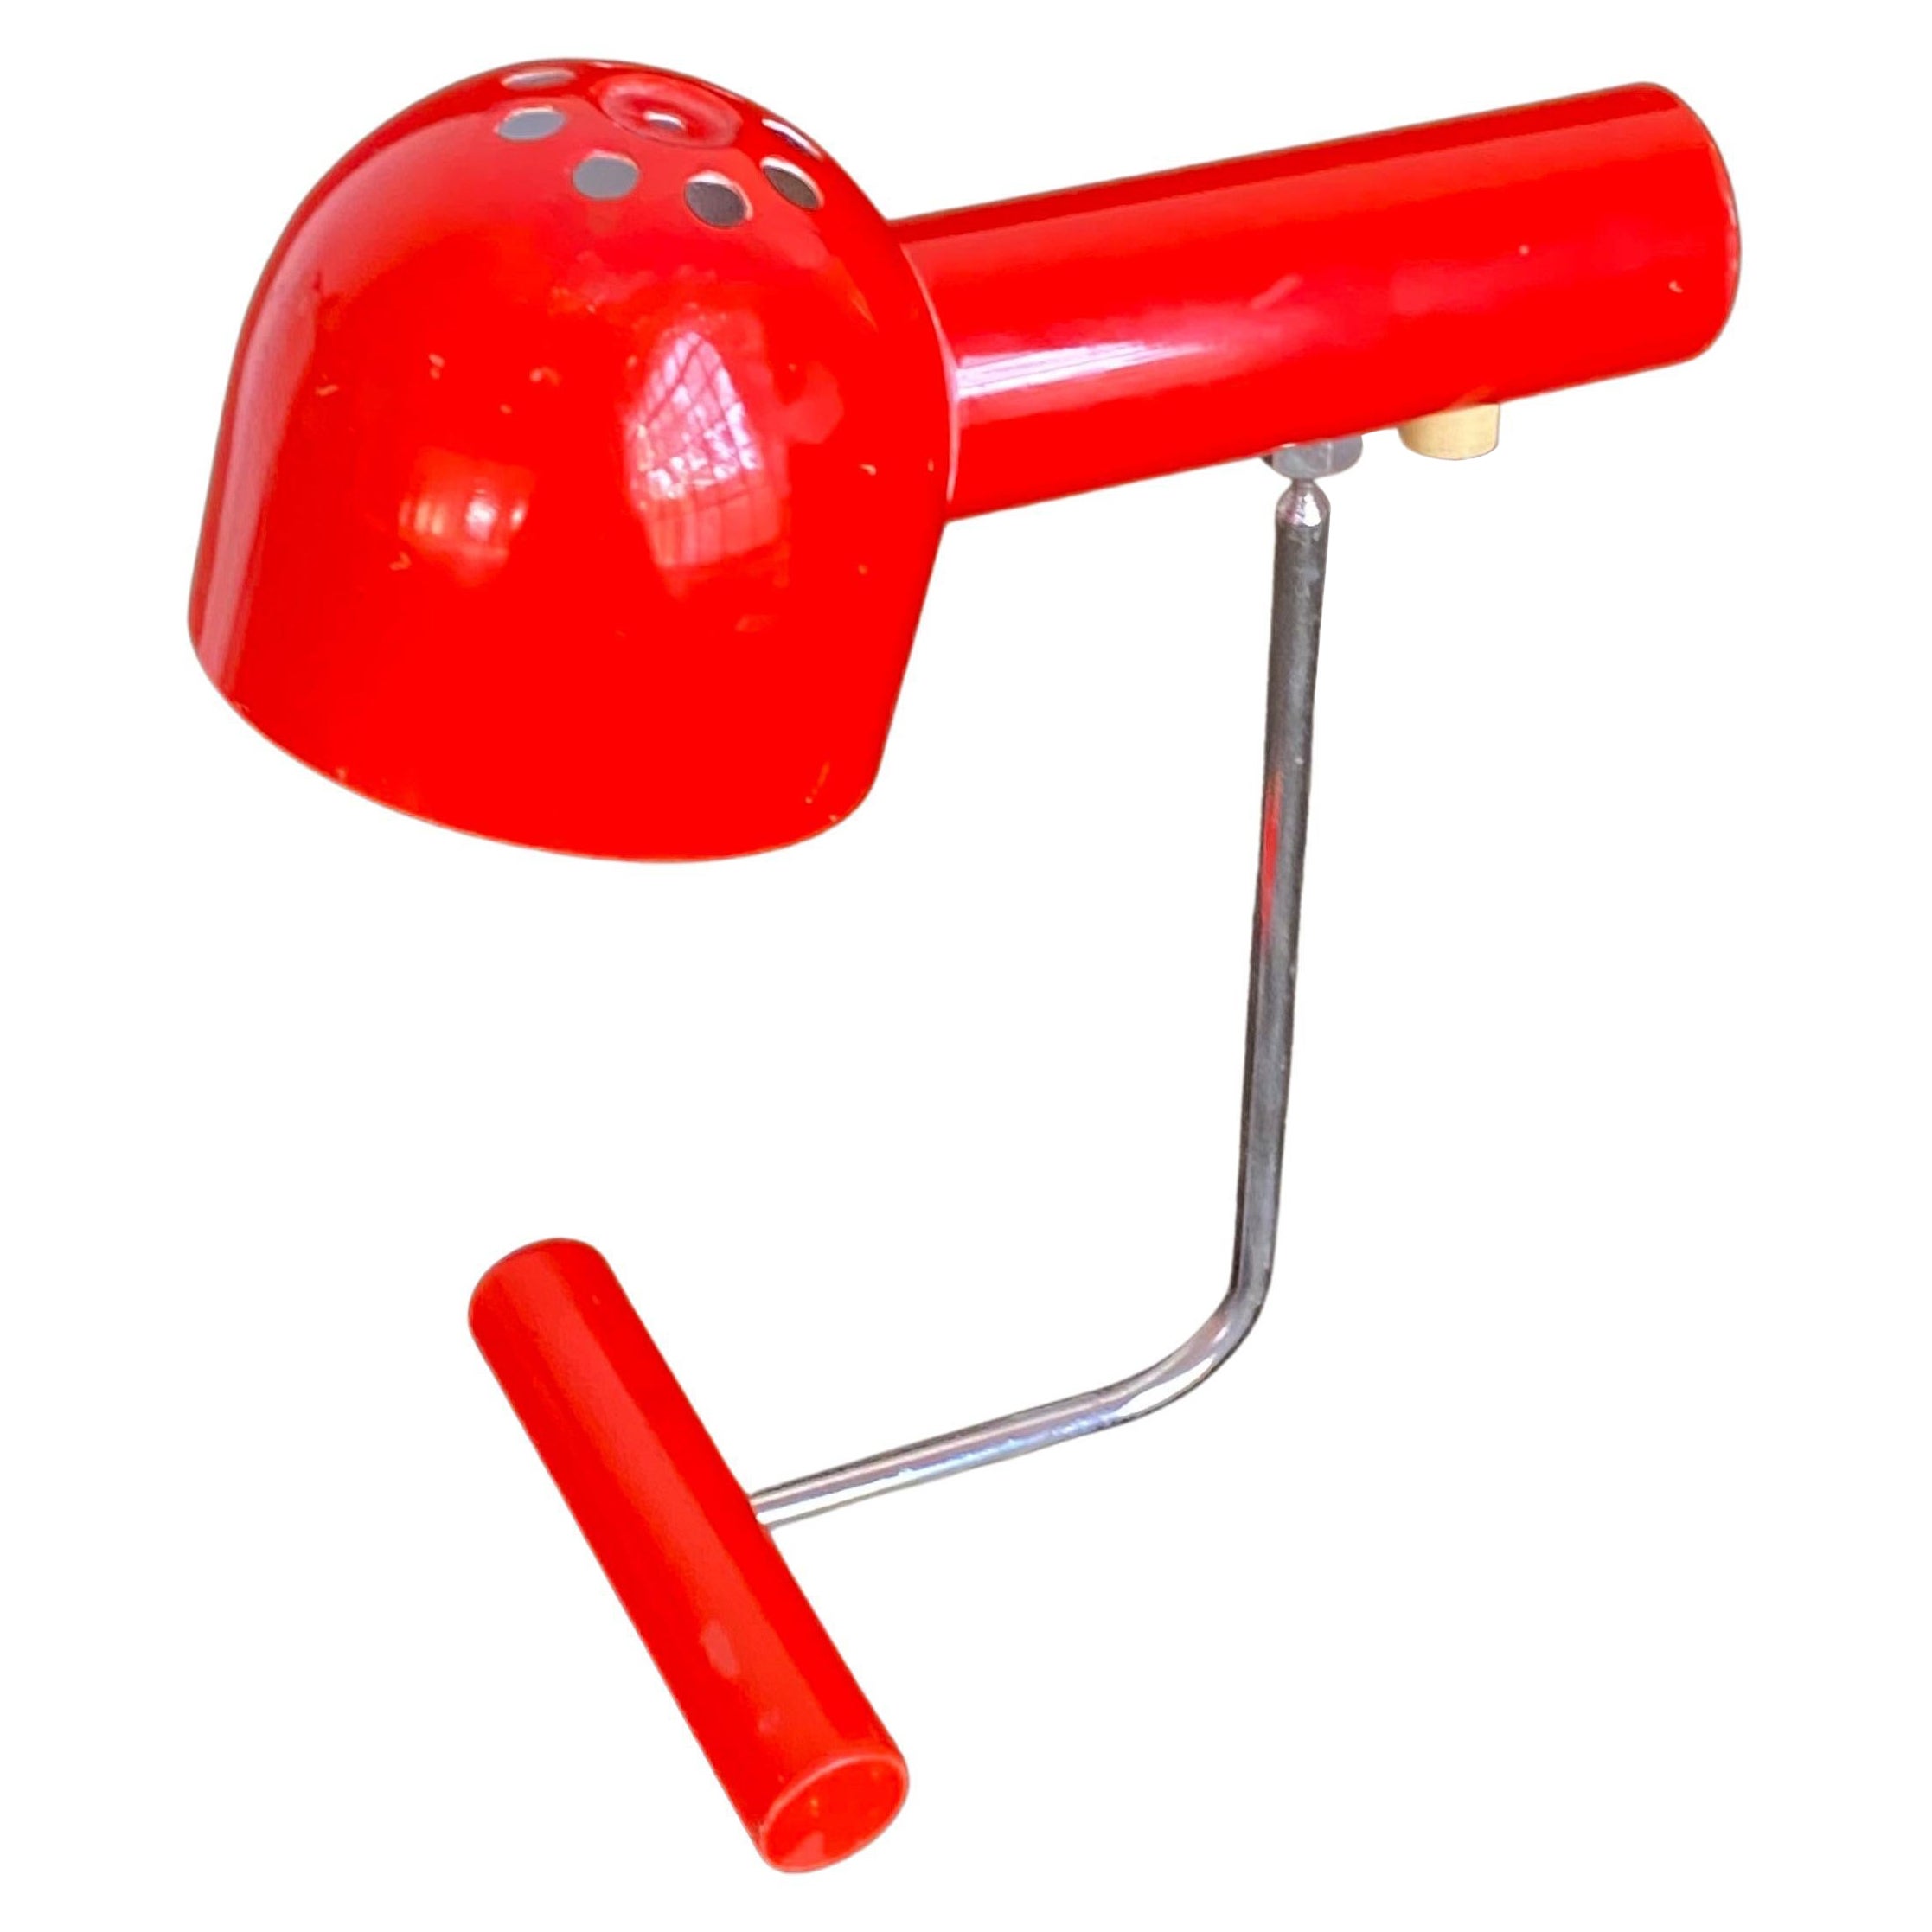 1960's Mid-Century Modern Red Desk or Table Lamp For Sale at 1stDibs